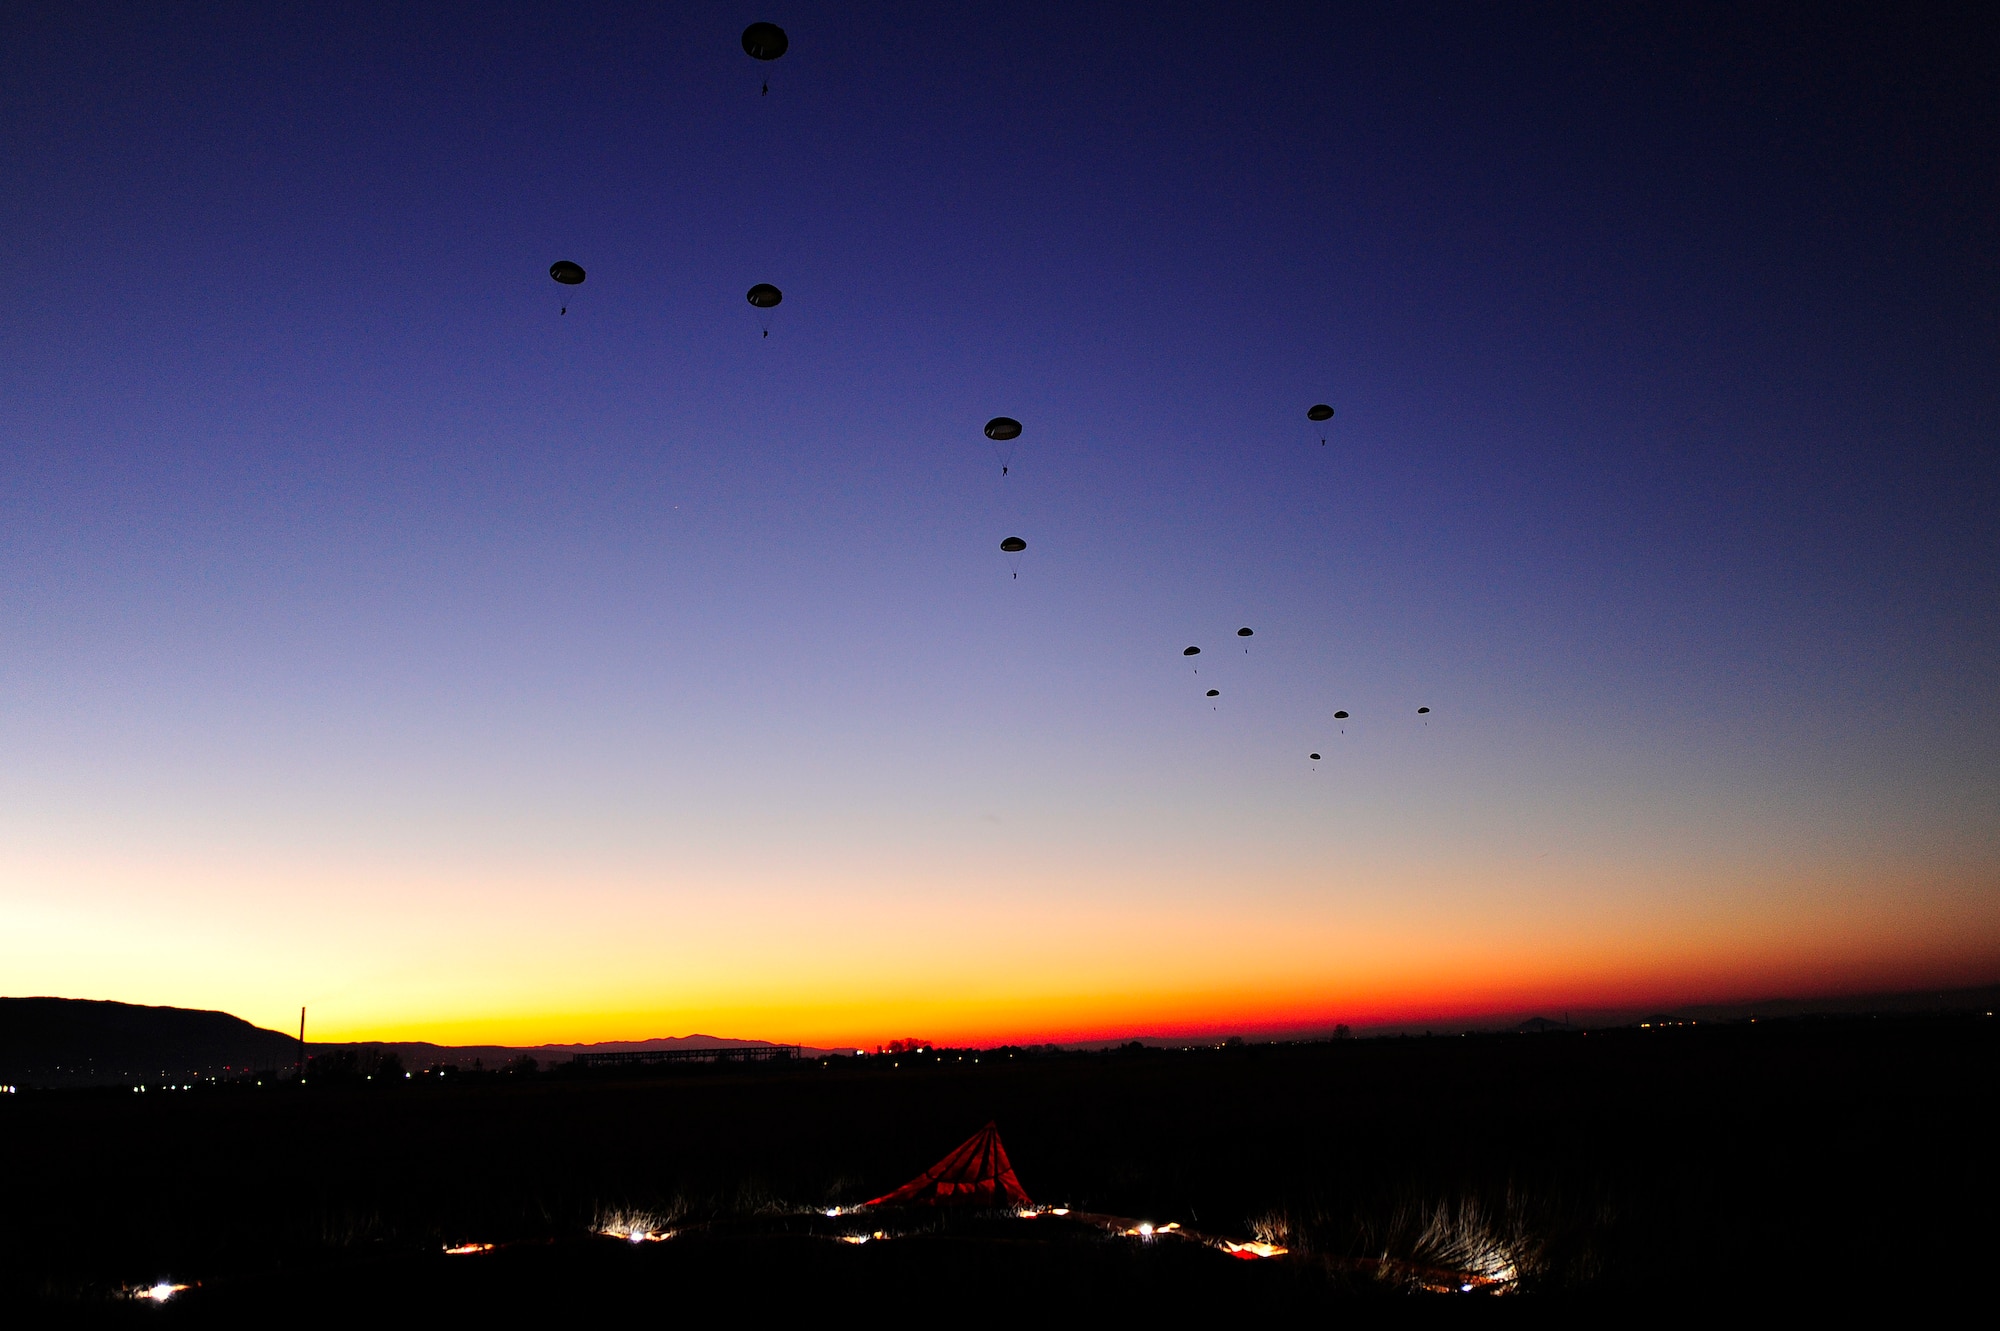 U.S. and Bulgarian paratroopers float to the ground after jumping from a C-130J Super Hercules aircraft during Operation Thracian Fall 2011, Oct. 19, 2011, in Plovdiv, Bulgaria. OTF11 is off-station training designed to enhance interoperability between U.S. and Bulgarian Air Forces as well as build partnerships with paratroopers from both. (U.S. Air Force photo by Senior Airman Stephen J. Otero)